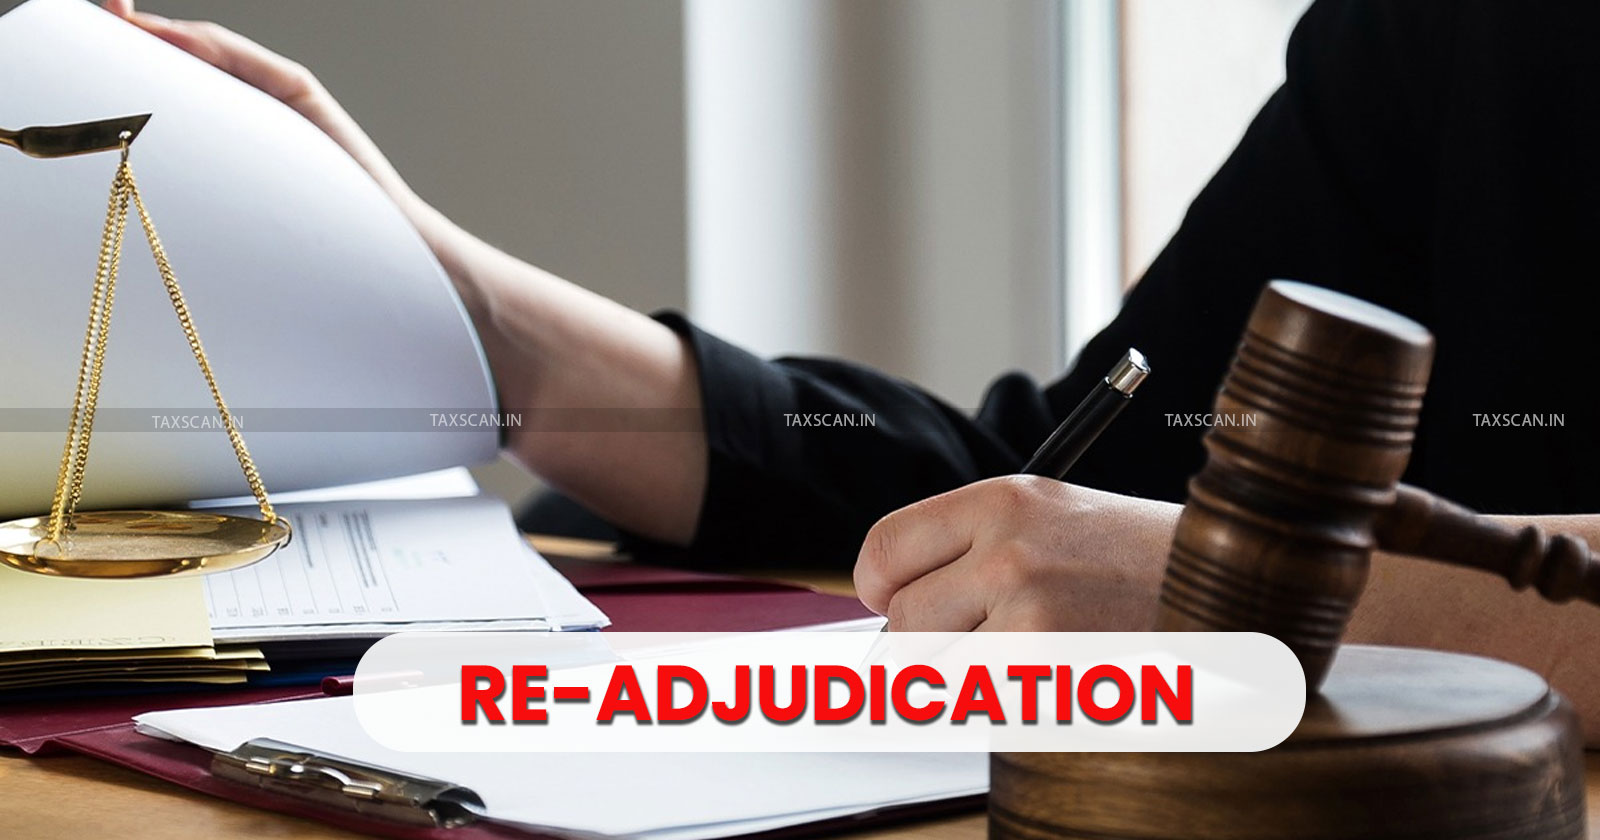 CESTAT - Re-adjudication - Service Tax - Written Submissions - taxscan